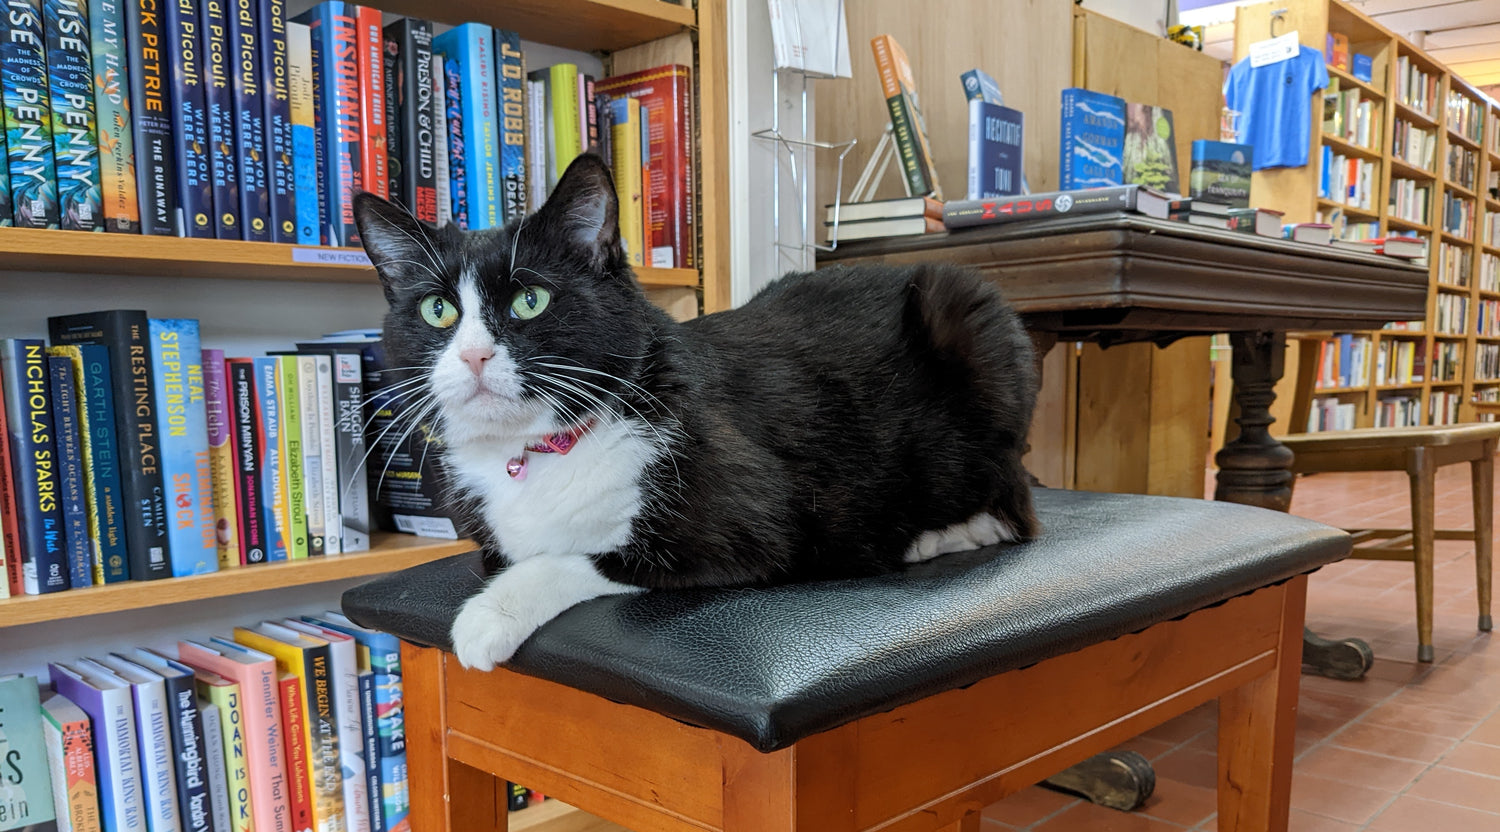 Boswell the store cat in front of full bookshelves of fiction and nonfiction.